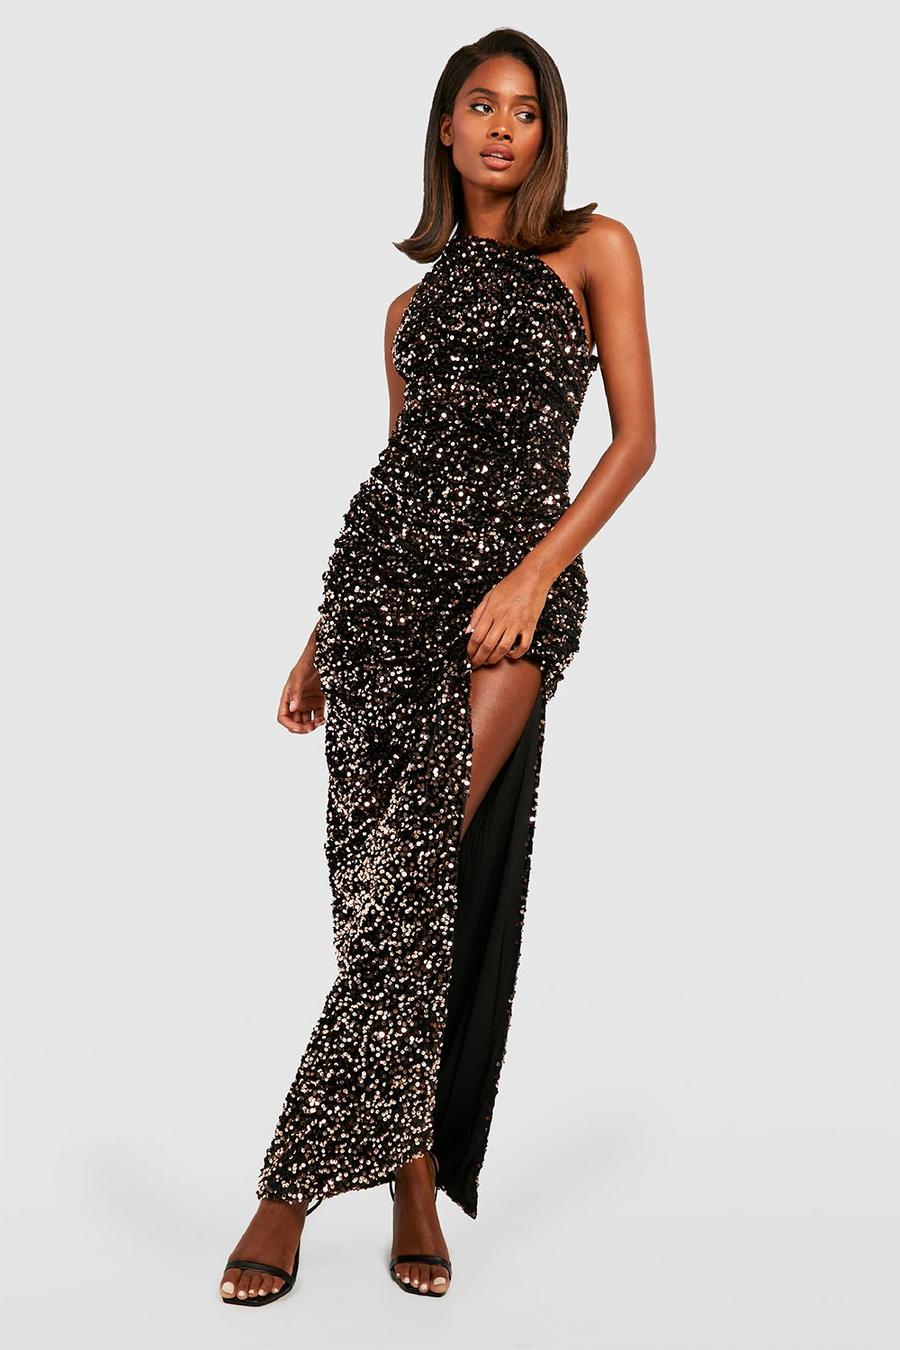 New Year's Eve Dresses 2023, New Year's Eve Outfits